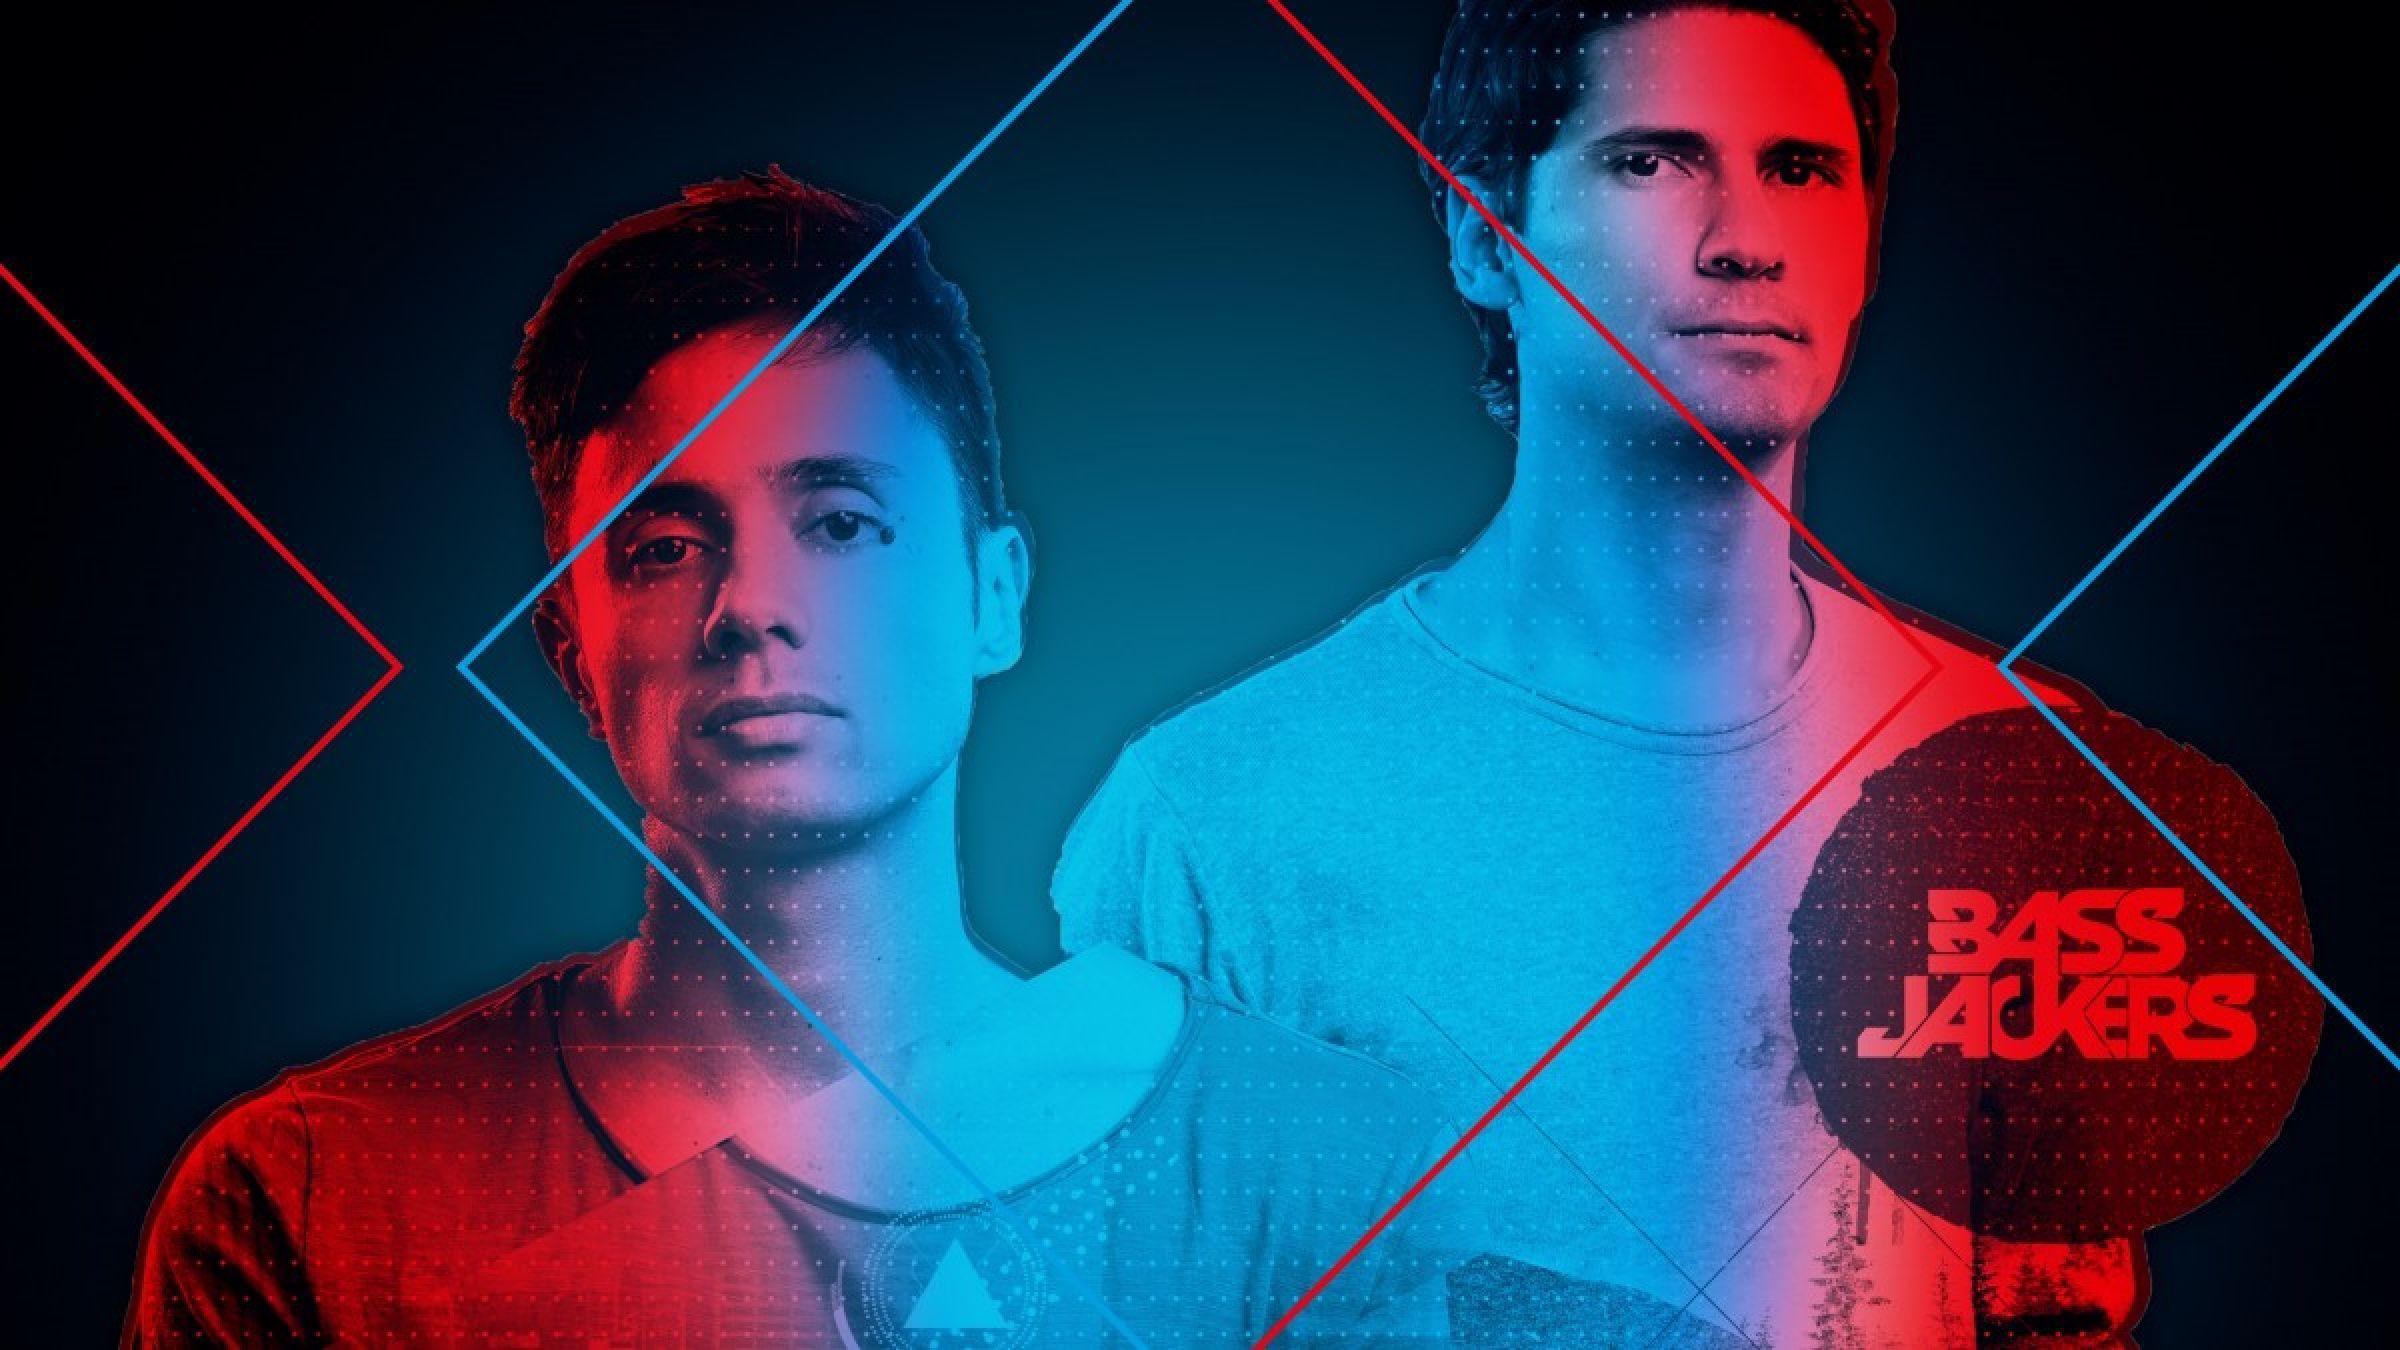 Bassjackers Wallpaper Image Photo Picture Background